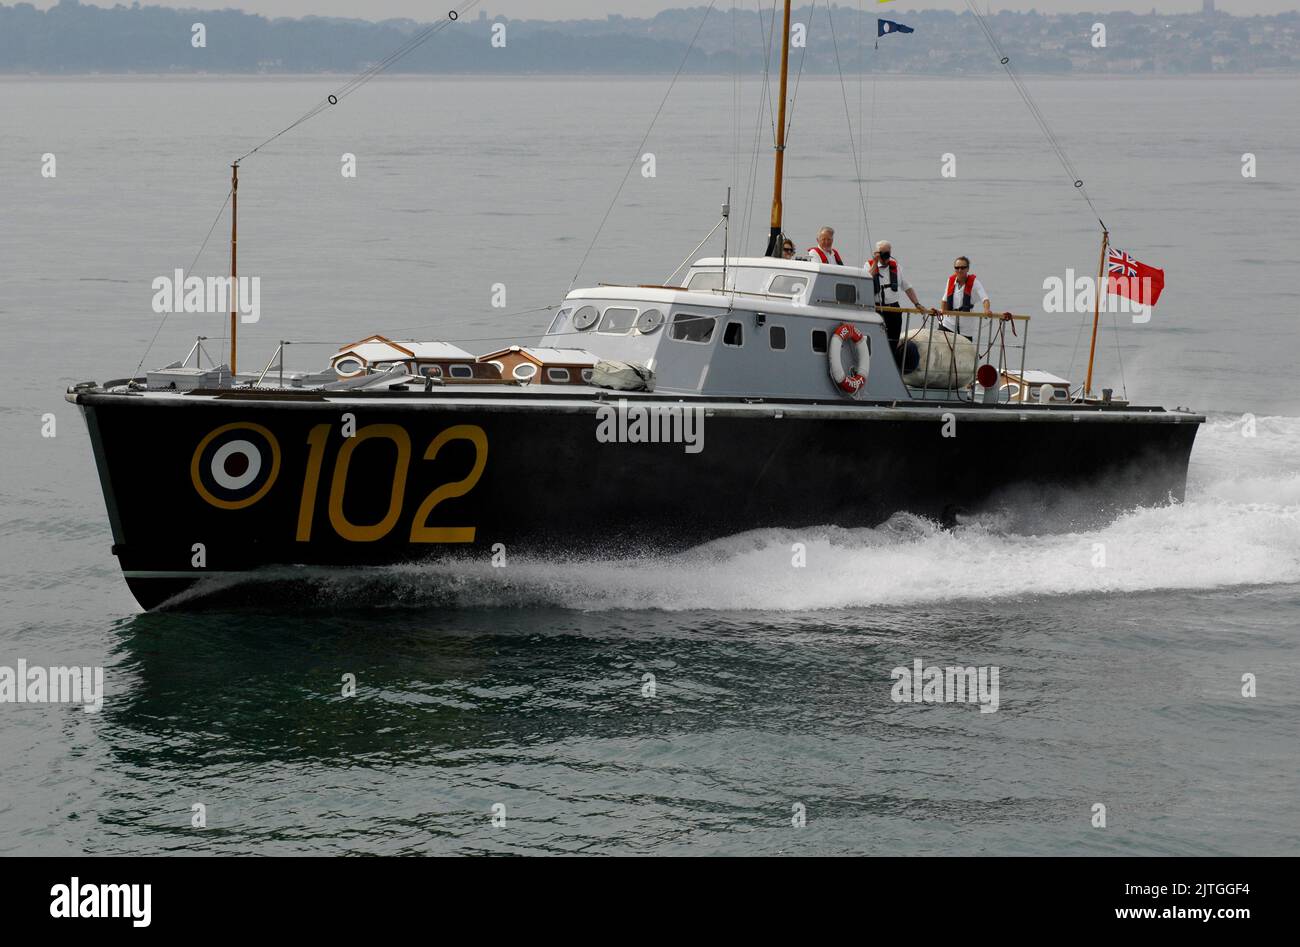 AJAXNETPHOTO. 25TH AUGUST, 2016. SOLENT, ENGLAND. - HIGH SPEED LAUNCH - RESTORED SECOND WORLD WAR RAF AIR SEA RESCUE LAUNCH HSL 102 BUILT IN 1937 AT SPEED IN THE SOLENT. VESSEL WAS ONE OF THE RAF 100 CLASS DESIGNED BY FRED COOPER AND BUILT BY BRITISH POWERBOATS AT HYTHE. PHOTO:JONATHAN EASTLAND/AJAX REF:D162508 6156 Stock Photo